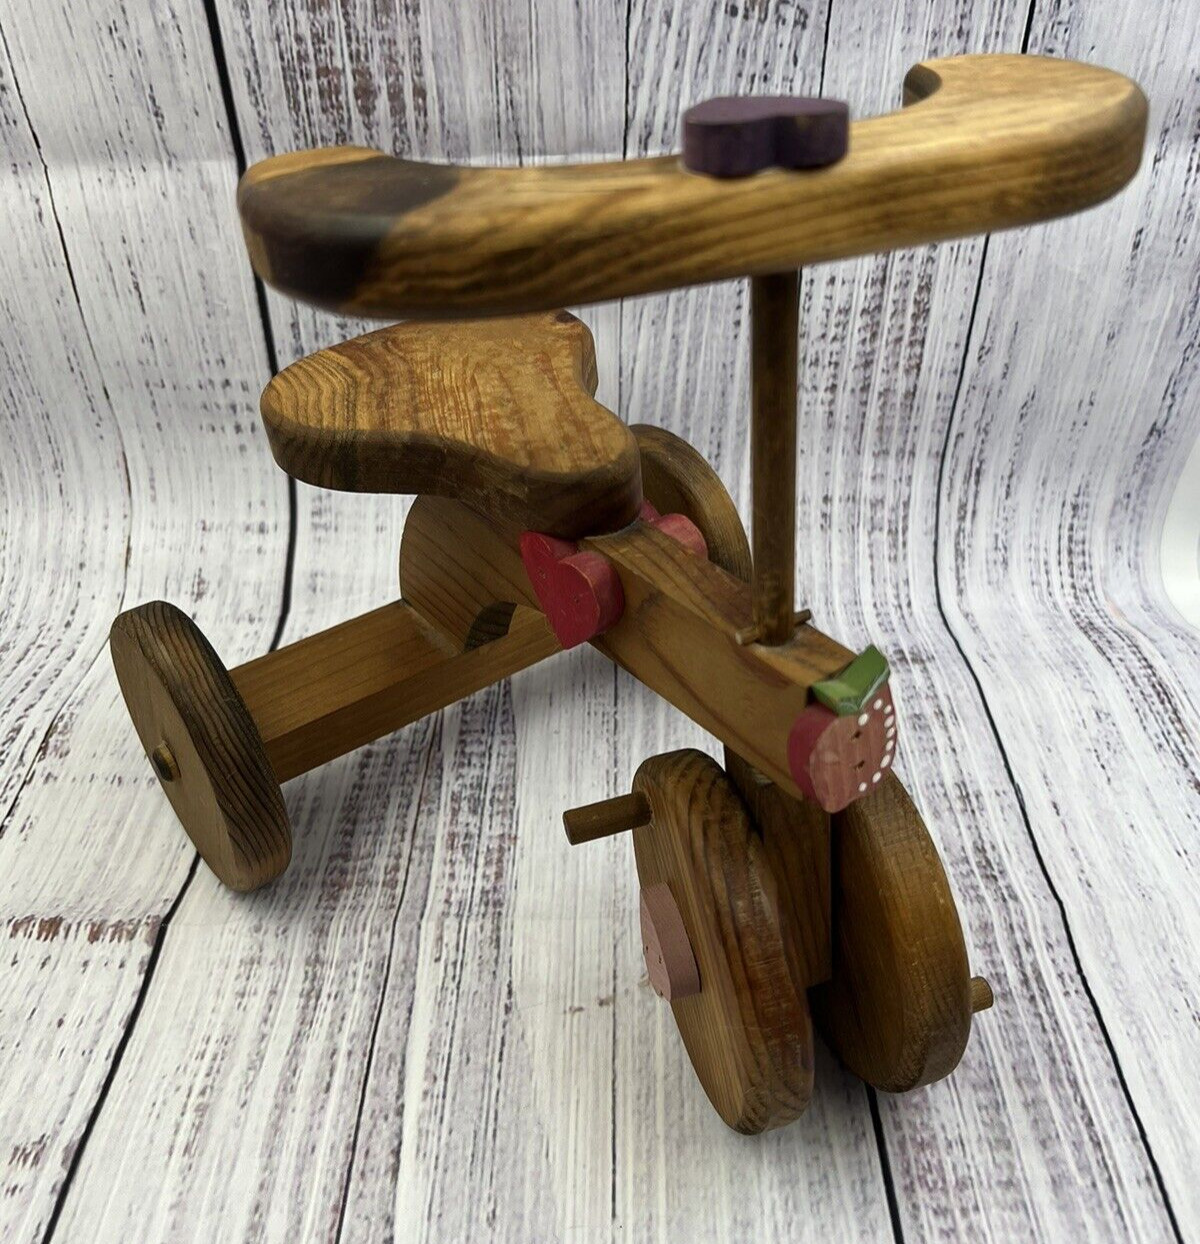 Vintage Small Wood Decorative Tricycle Bike Scooter For Dolls/Plush Apple Hearts